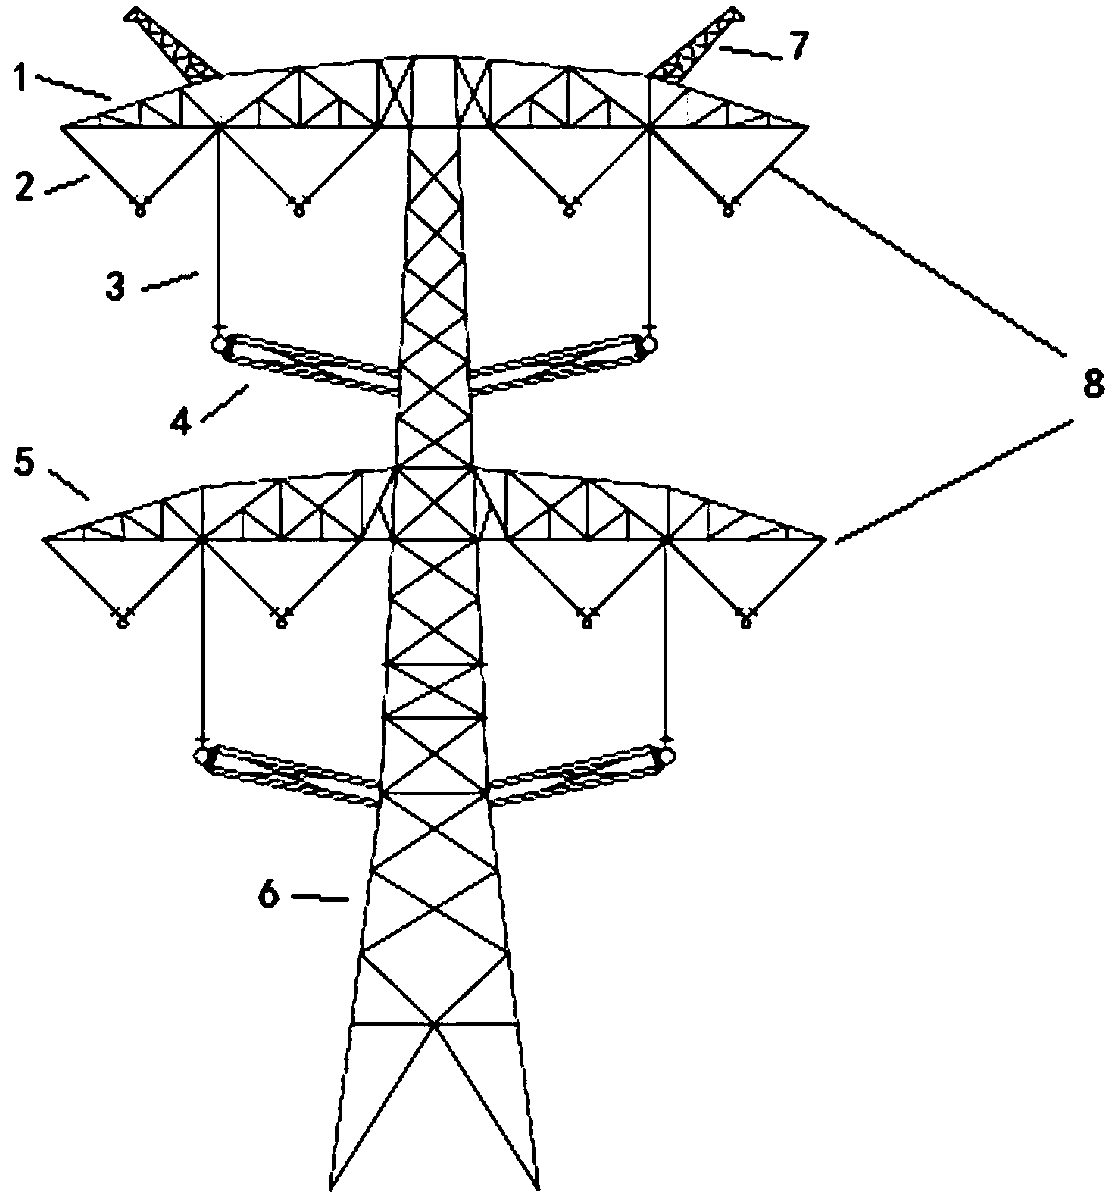 Device for alternating-current 750 kV same-tower four-circuit transmission tower